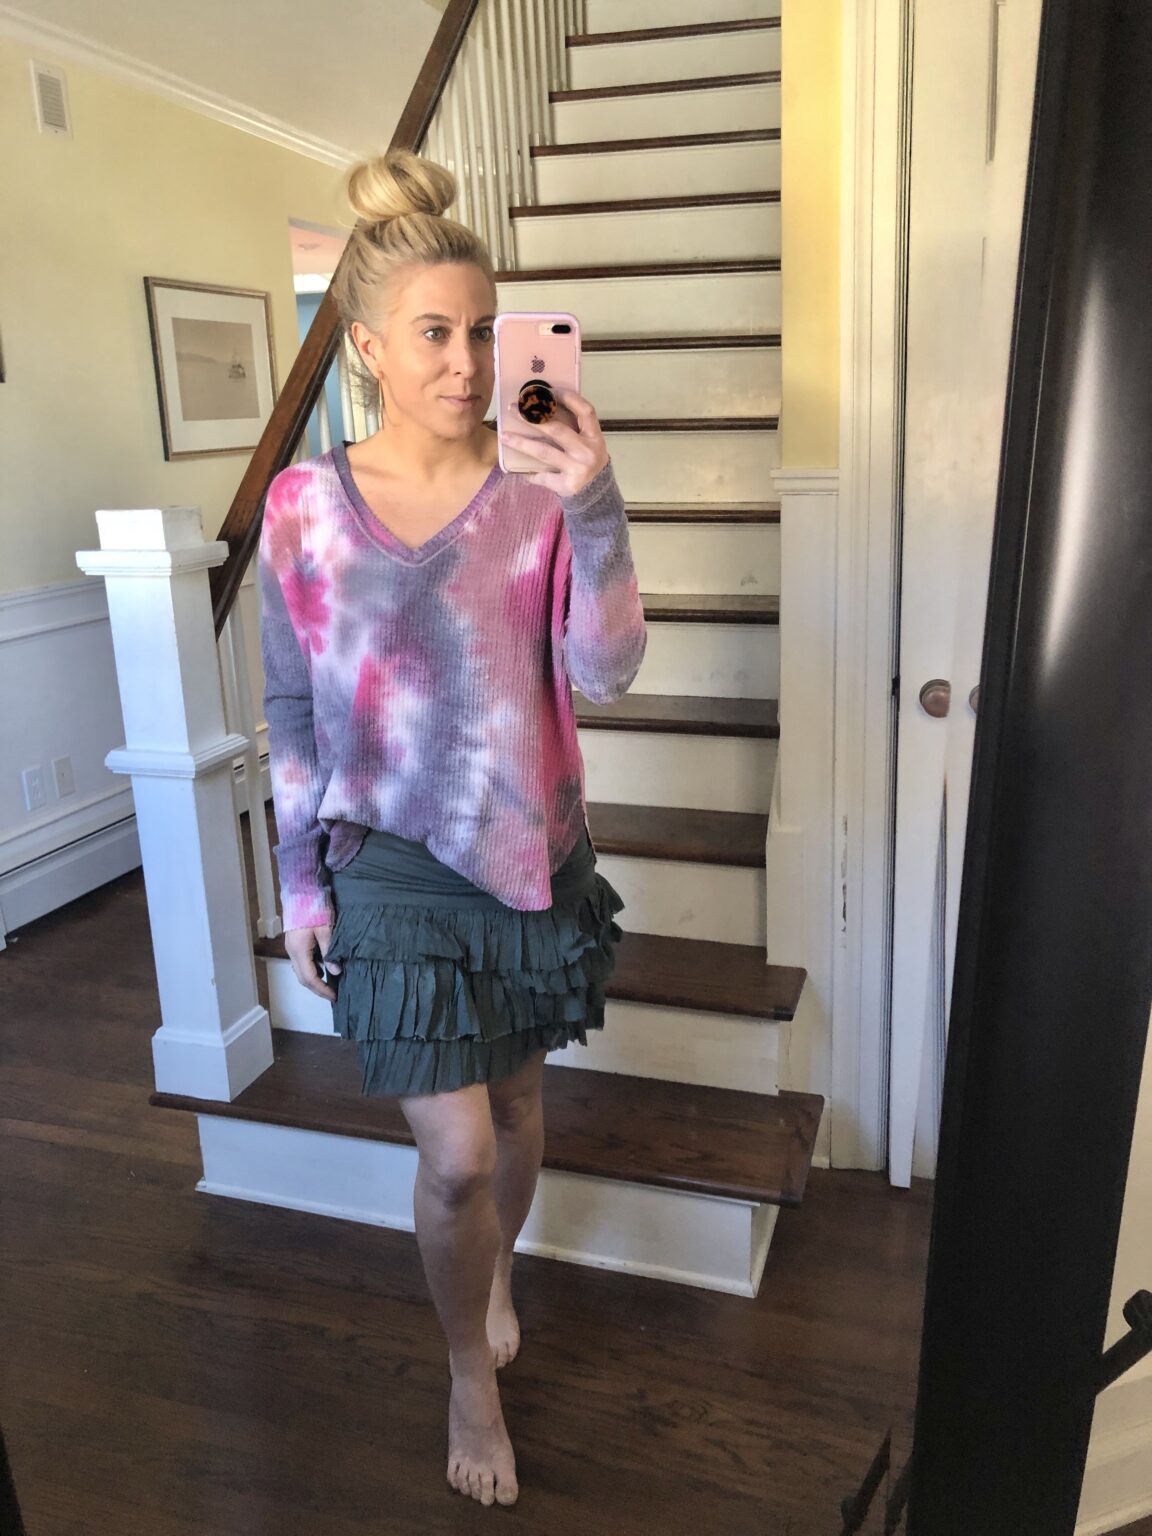 Tie Dye Clothing - 5 Ways to Style - Stylish Life for Moms